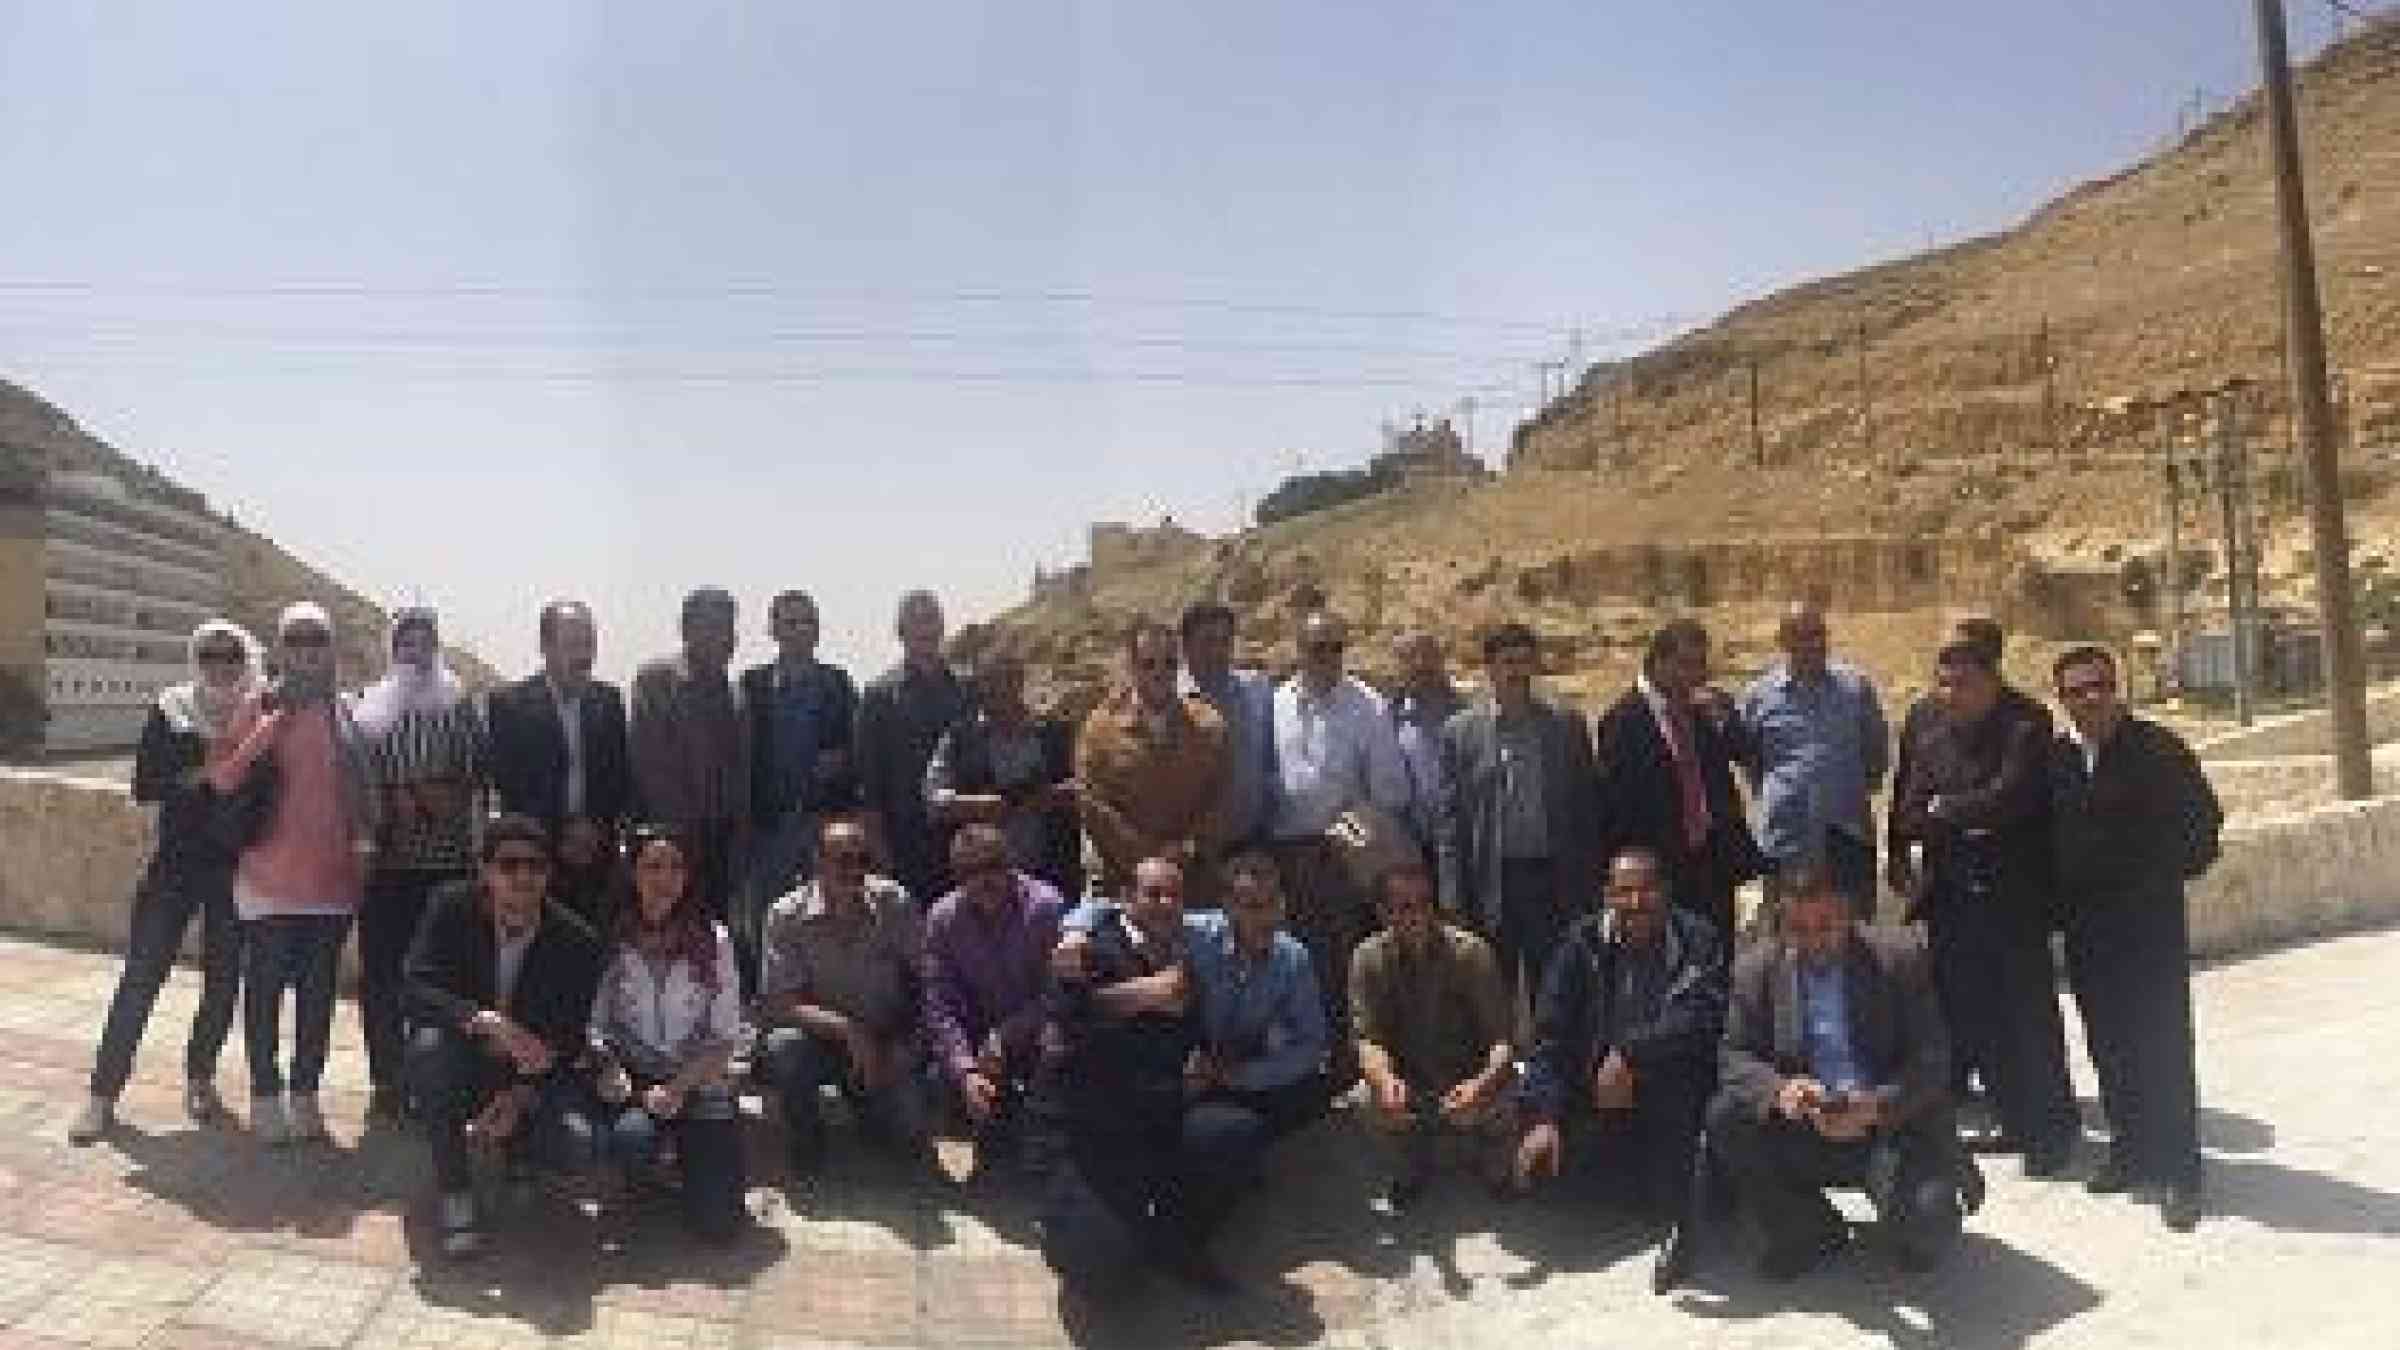 Participants in the study tour learned key lessons from Aqaba and Petra (Photo: UNISDR)